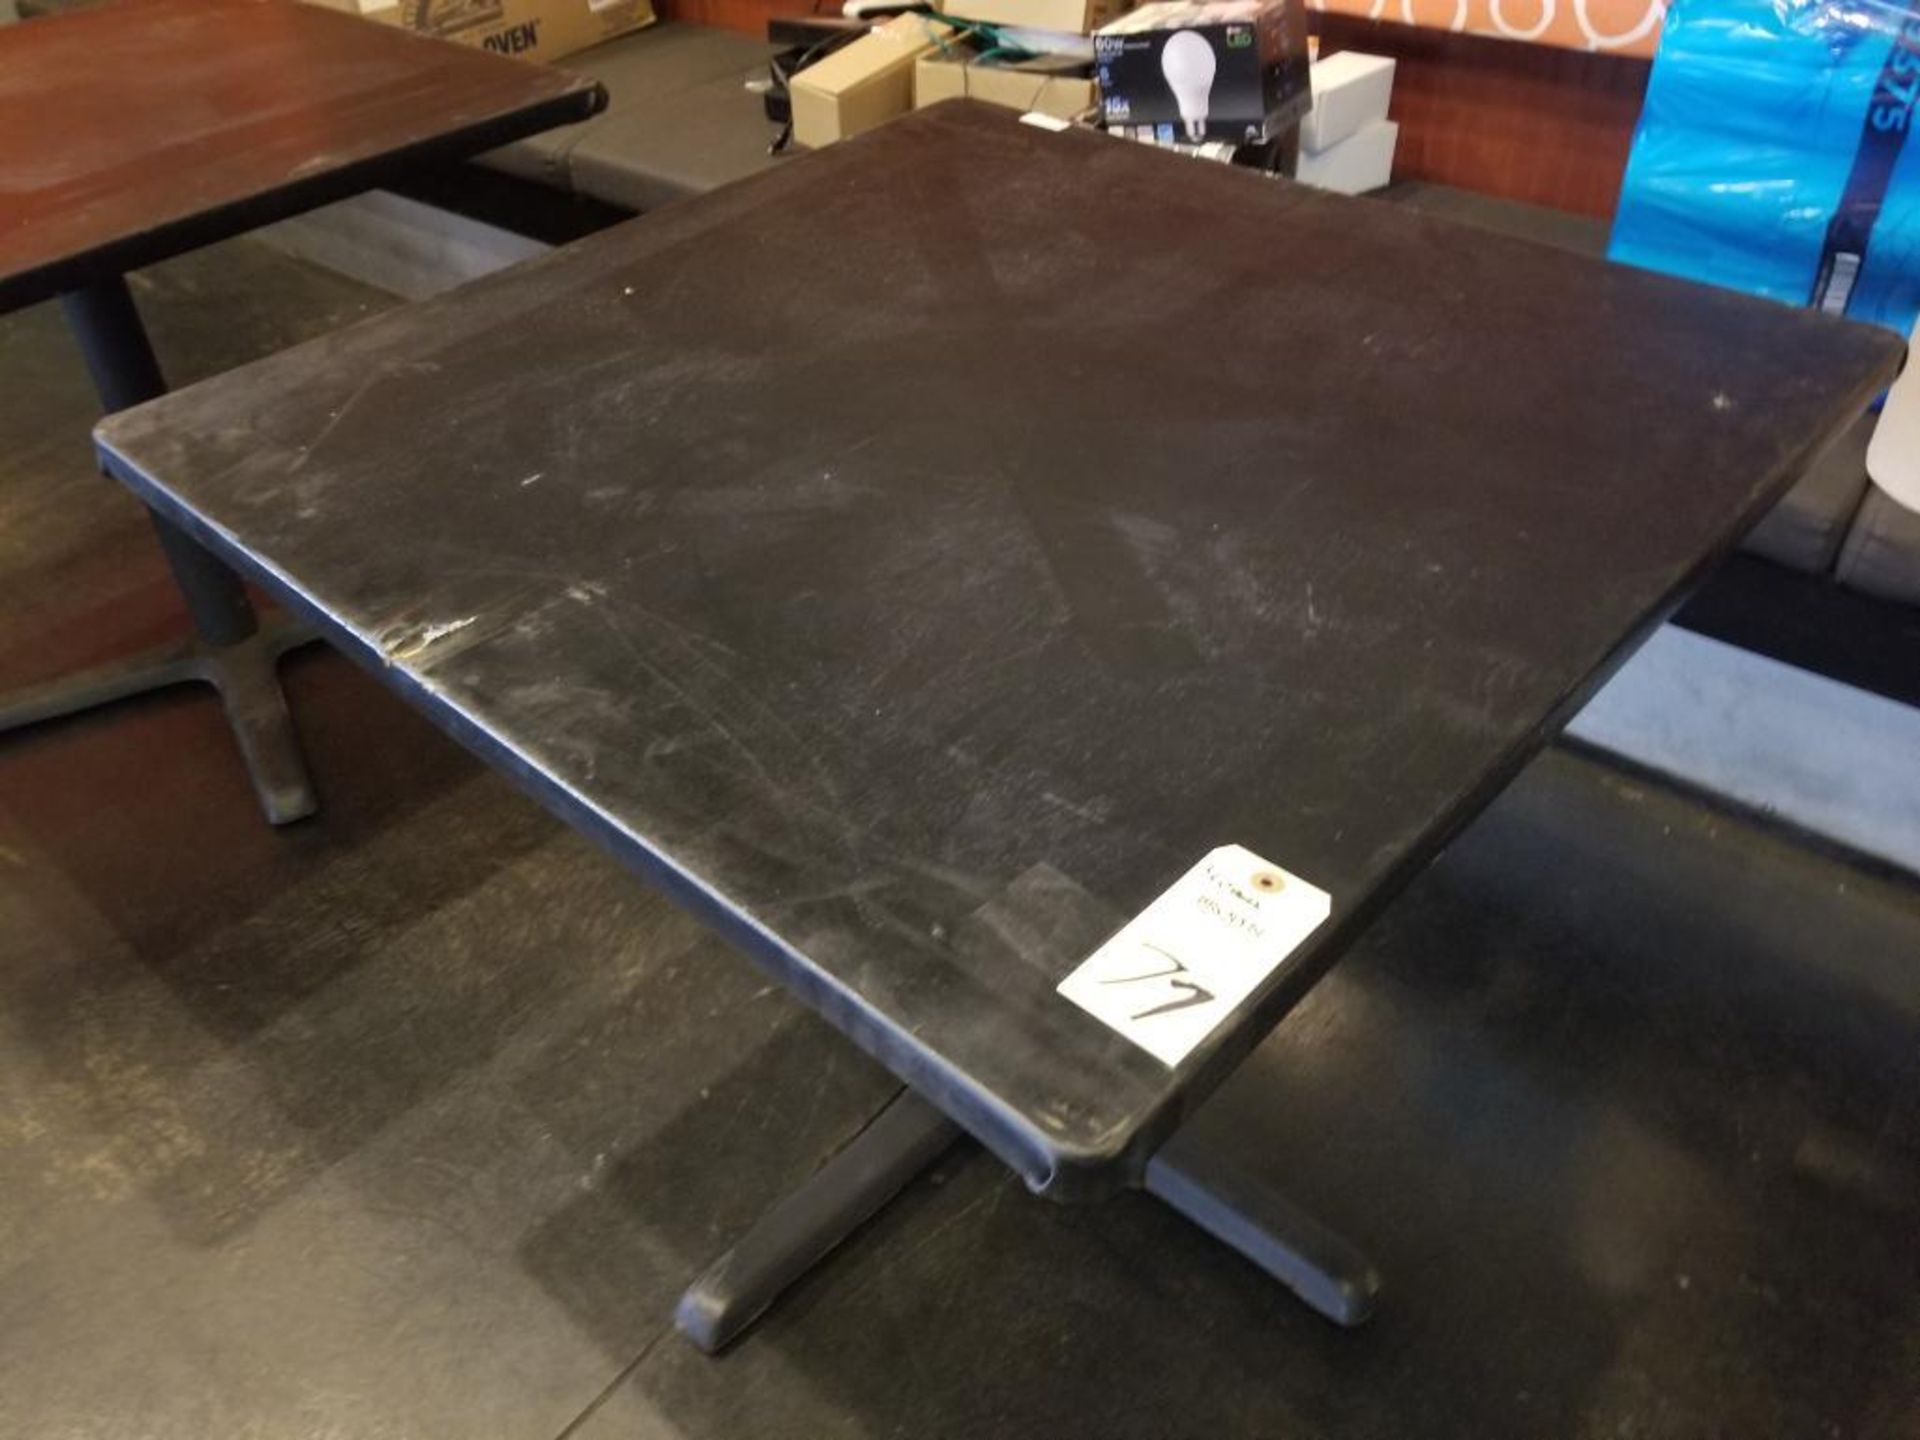 36in x 36in table with 4 chairs. - Image 3 of 4